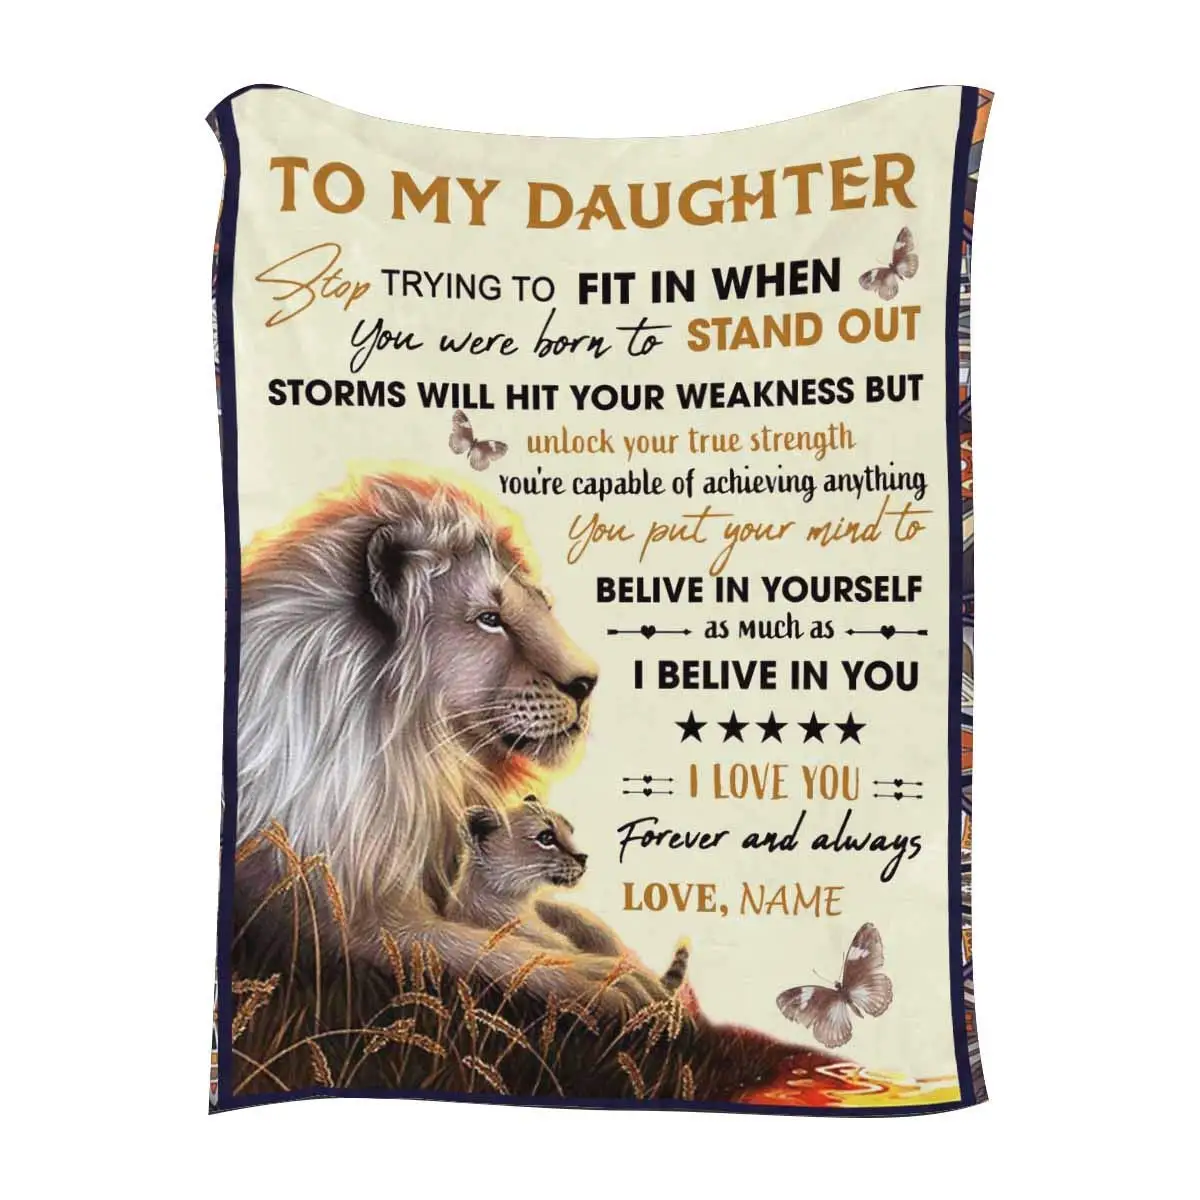 

Customized Fleece Blanket to My Daughter from Mom and Dad I Believe in You I Love You Forever and Always 120x150cm Custom Plush